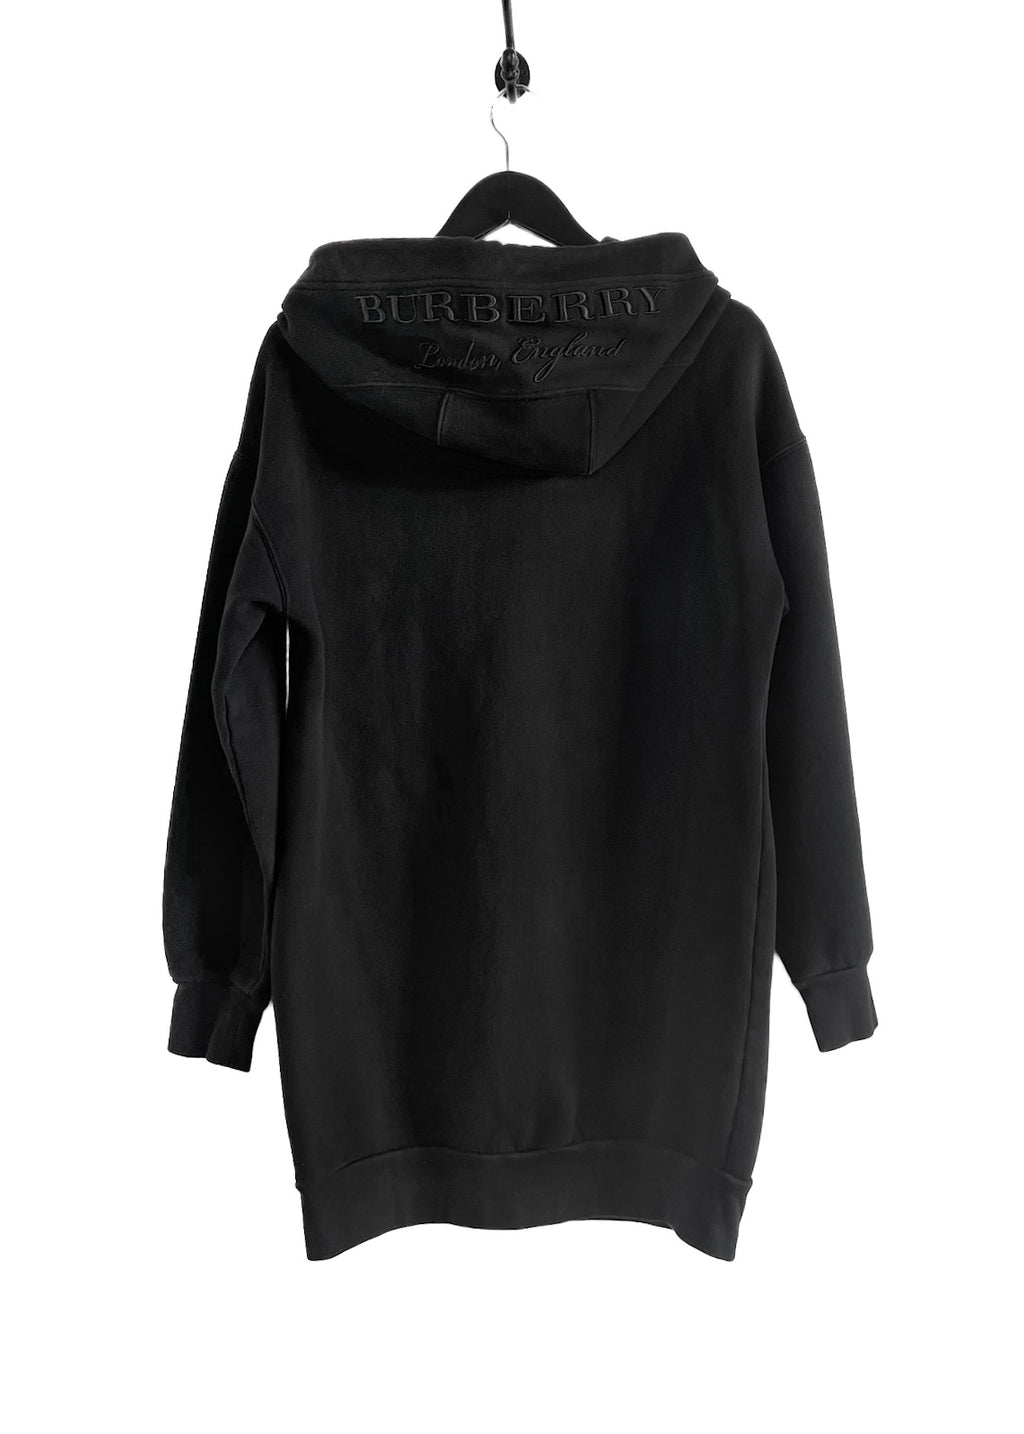 Burberry London Cardeiver Black Jersey Embroidered Hoodie Dress